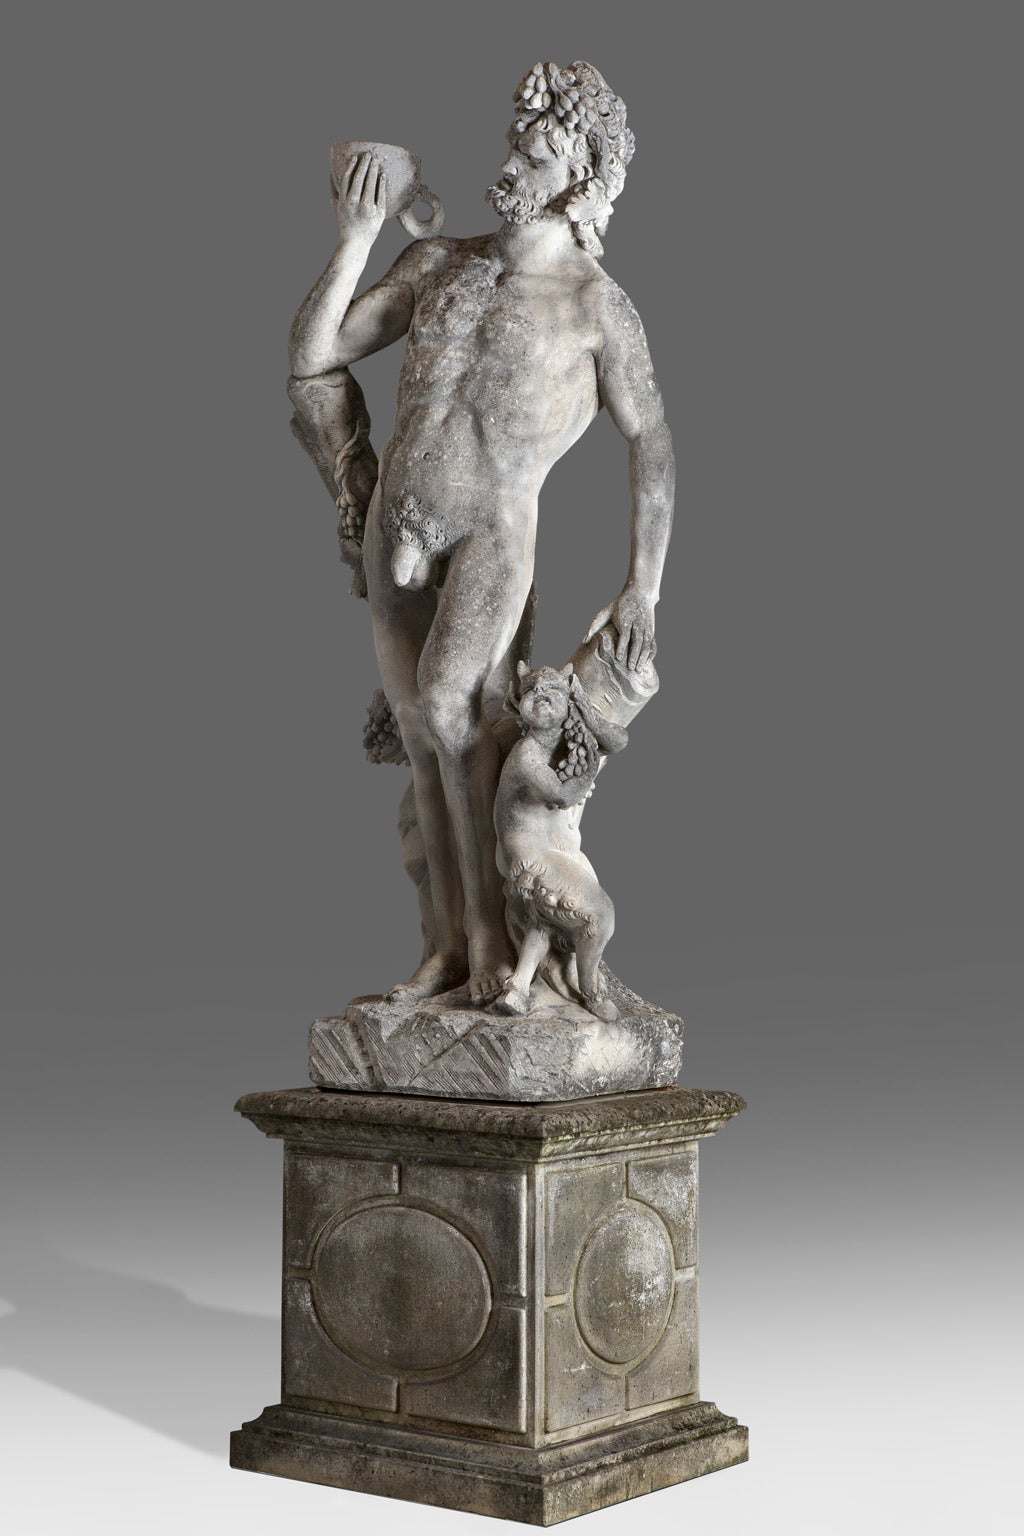 The God of wine portrayed nude and standing, a cup in his raised right hand, the infant satyr at his feet, on a rectangular section limestone plinth with moulded upper edges and base, the figure 250 cm. high, 350 cm. high overall.

It seems that